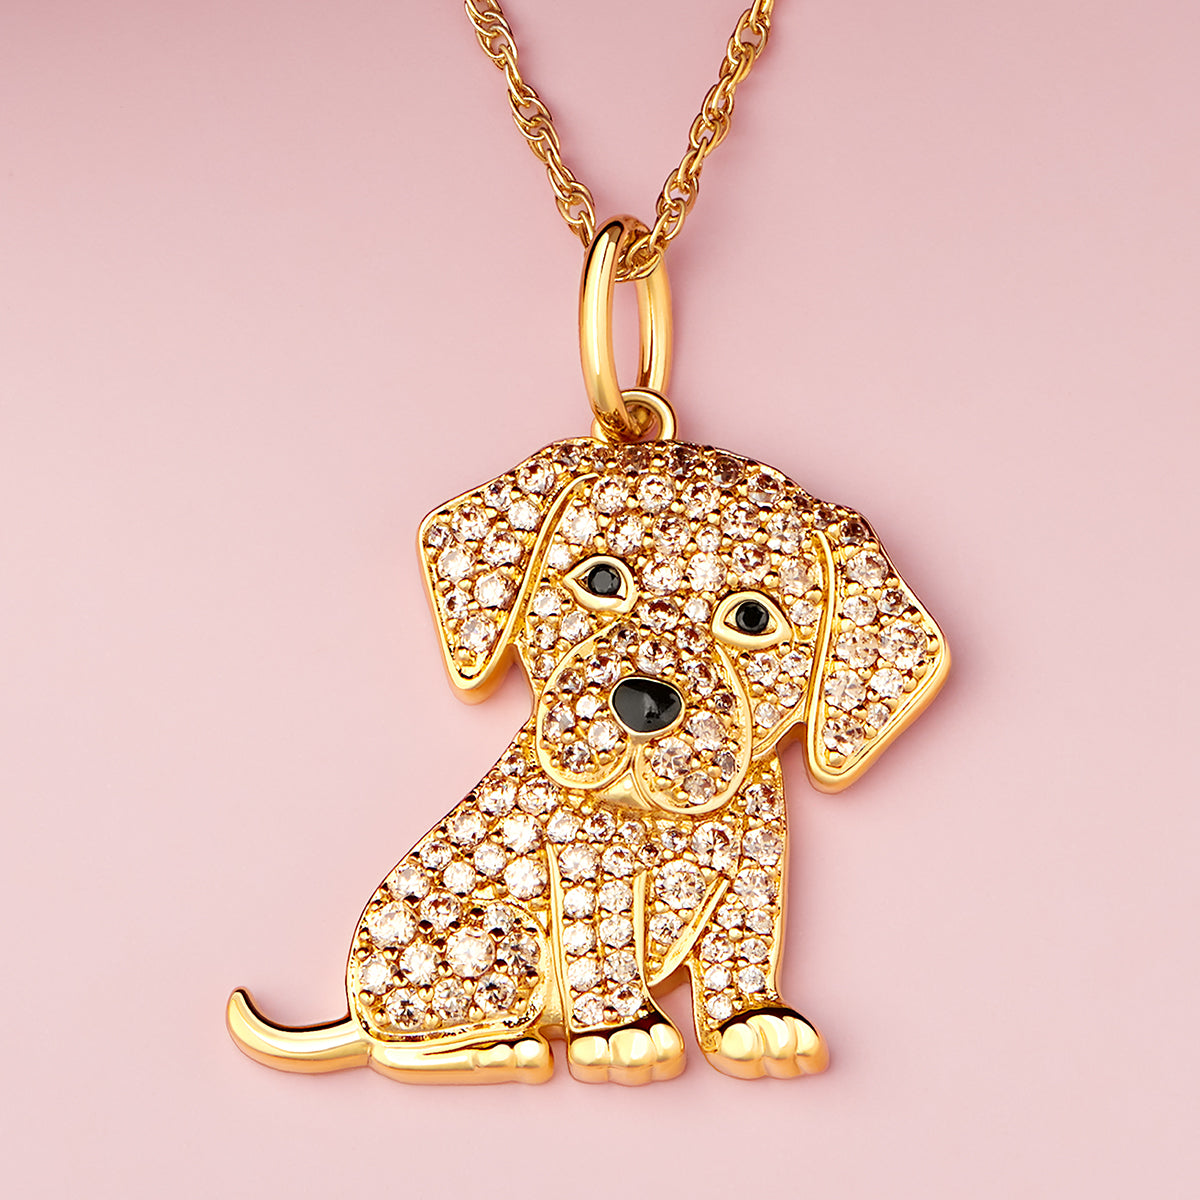 Buy Dog Pendant Products Online in Andorra la Vella at Best Prices